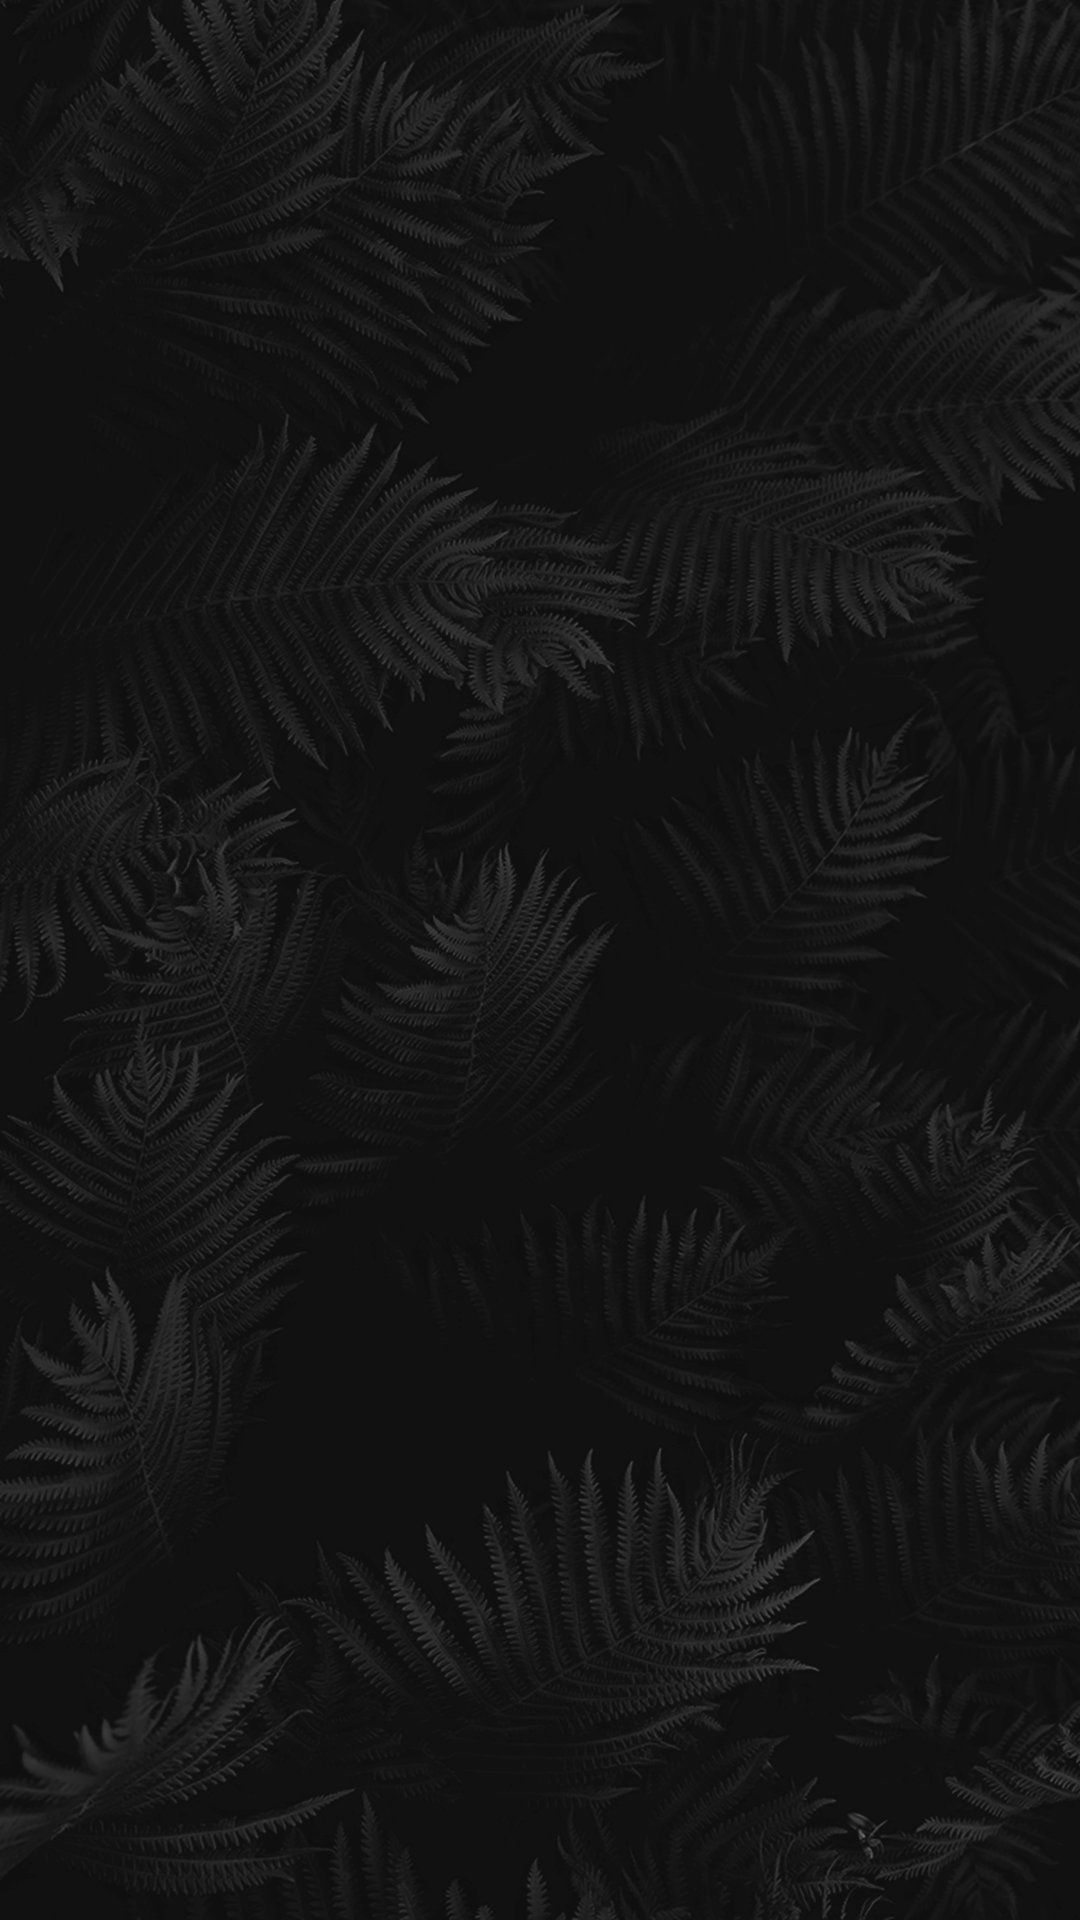 A black and white fern pattern on a black background - Leaves, black